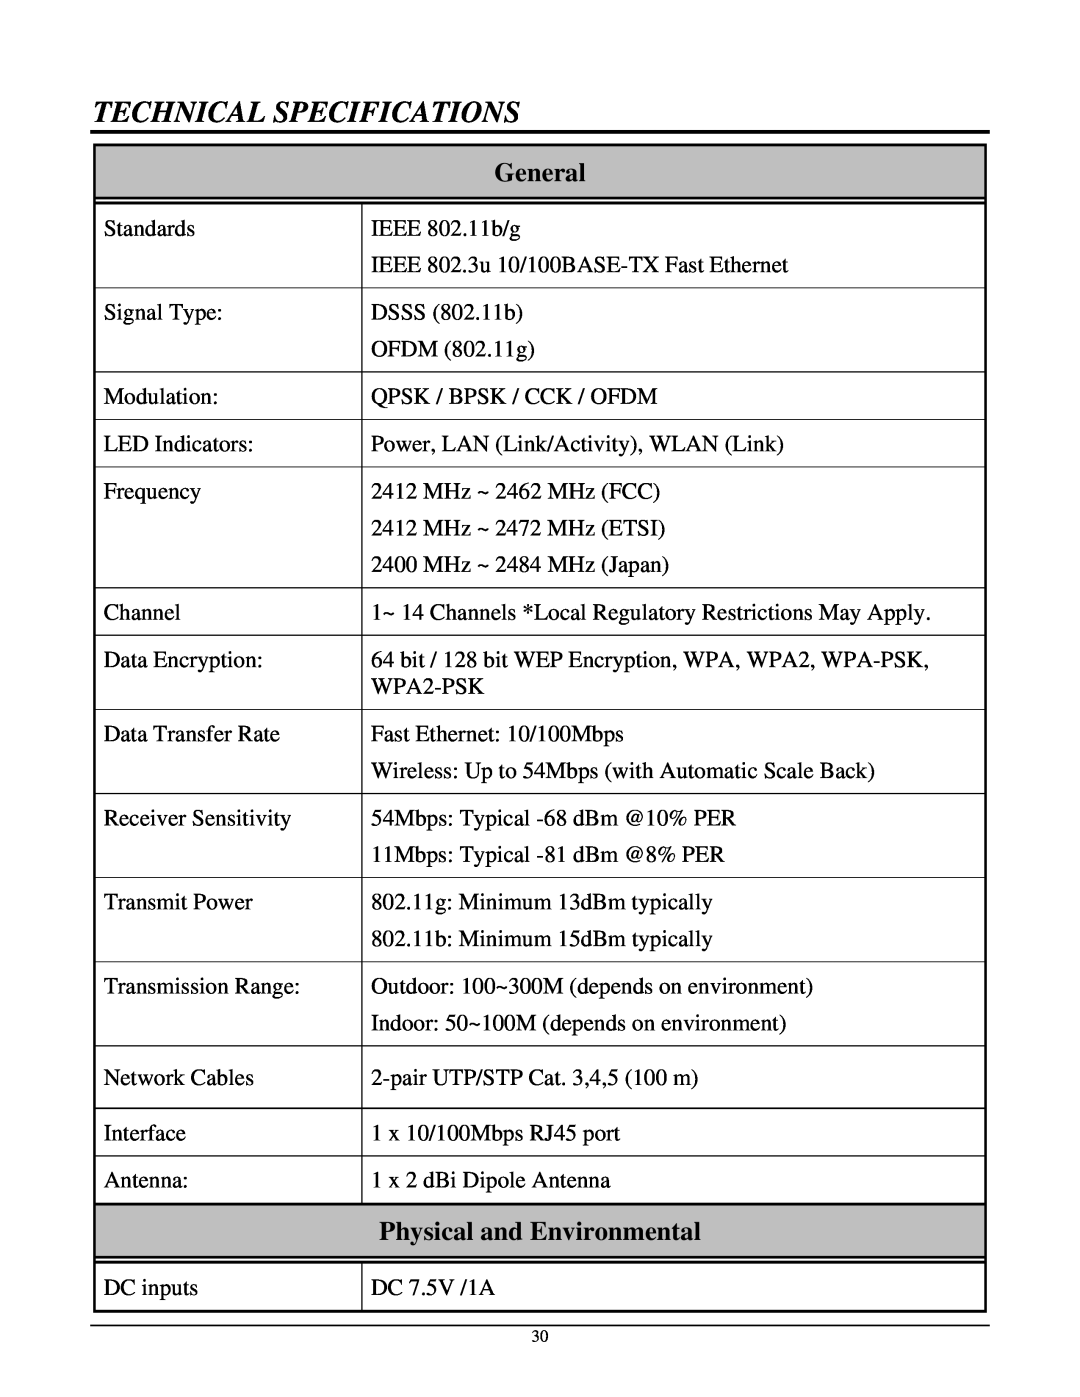 TRENDnet TEW-430APB manual Technical Specifications, General, Physical and Environmental 